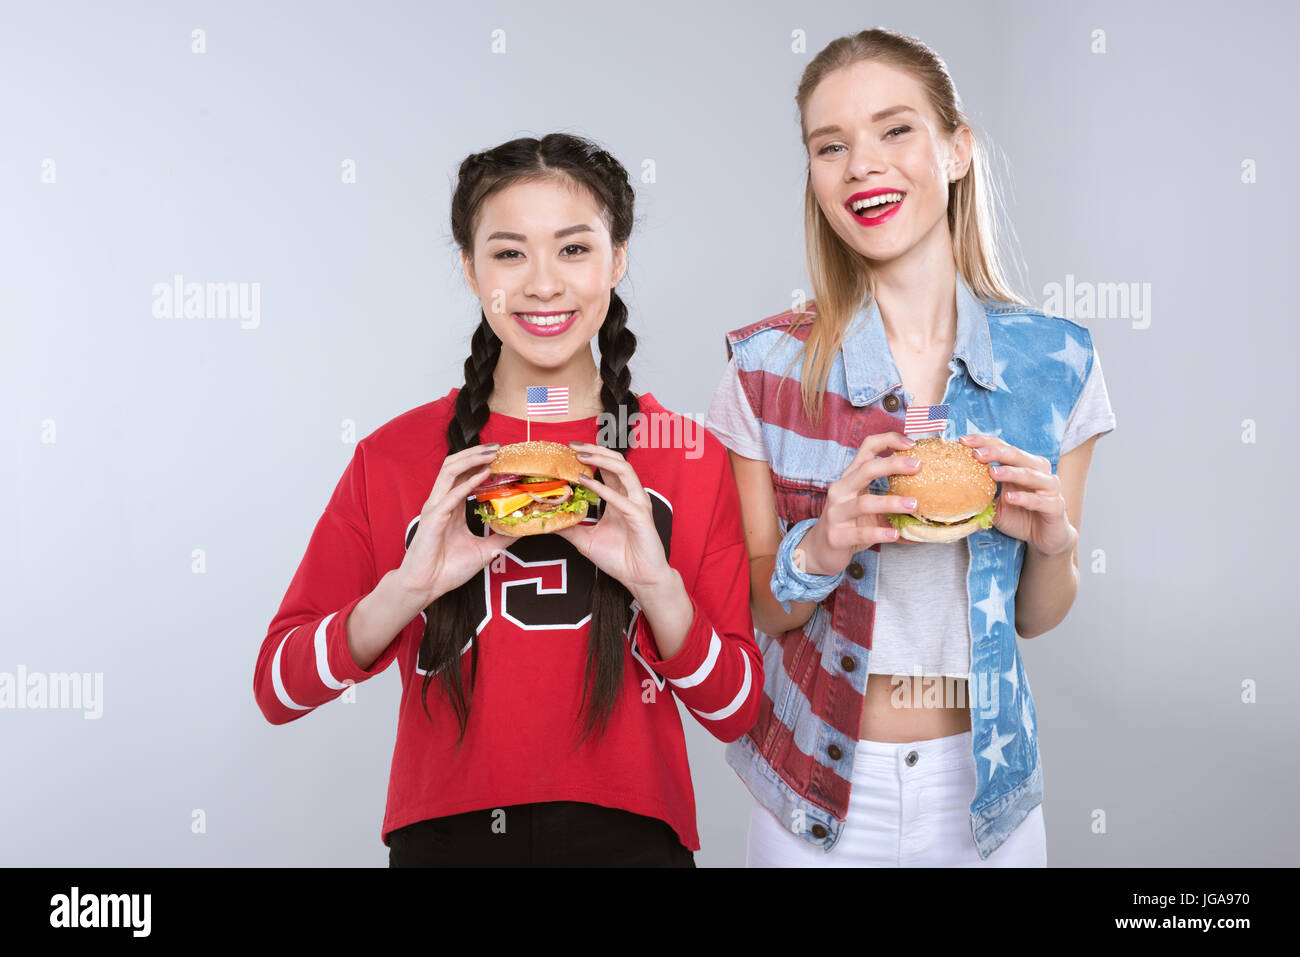 young smiling multiethnic girls holding burgers with USA flags, Independence Day Celebration Stock Photo